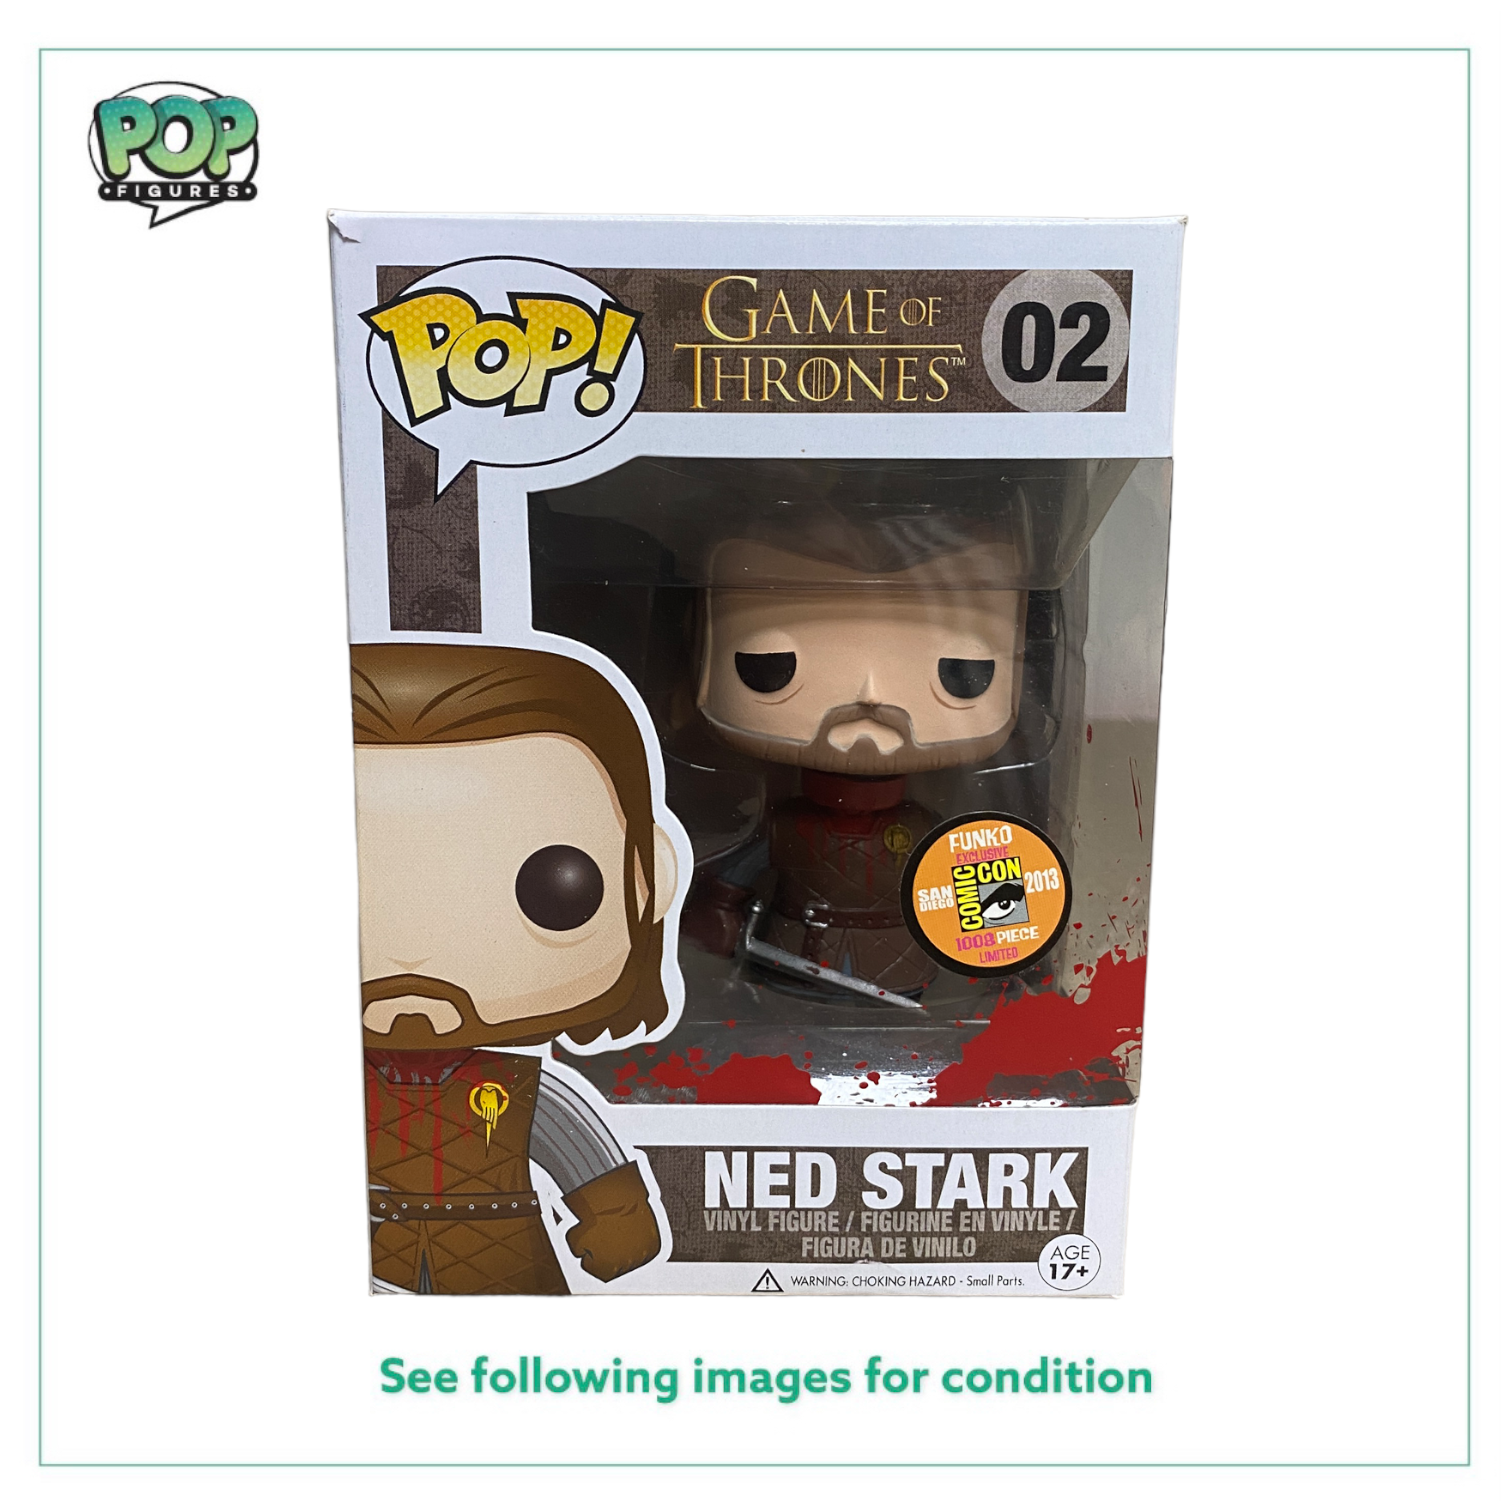 Ned Stark #02 (Headless) Funko Pop! - Game Of Thrones - SDCC 2013 Exclusive LE1008 Pcs - Condition 8.5/10